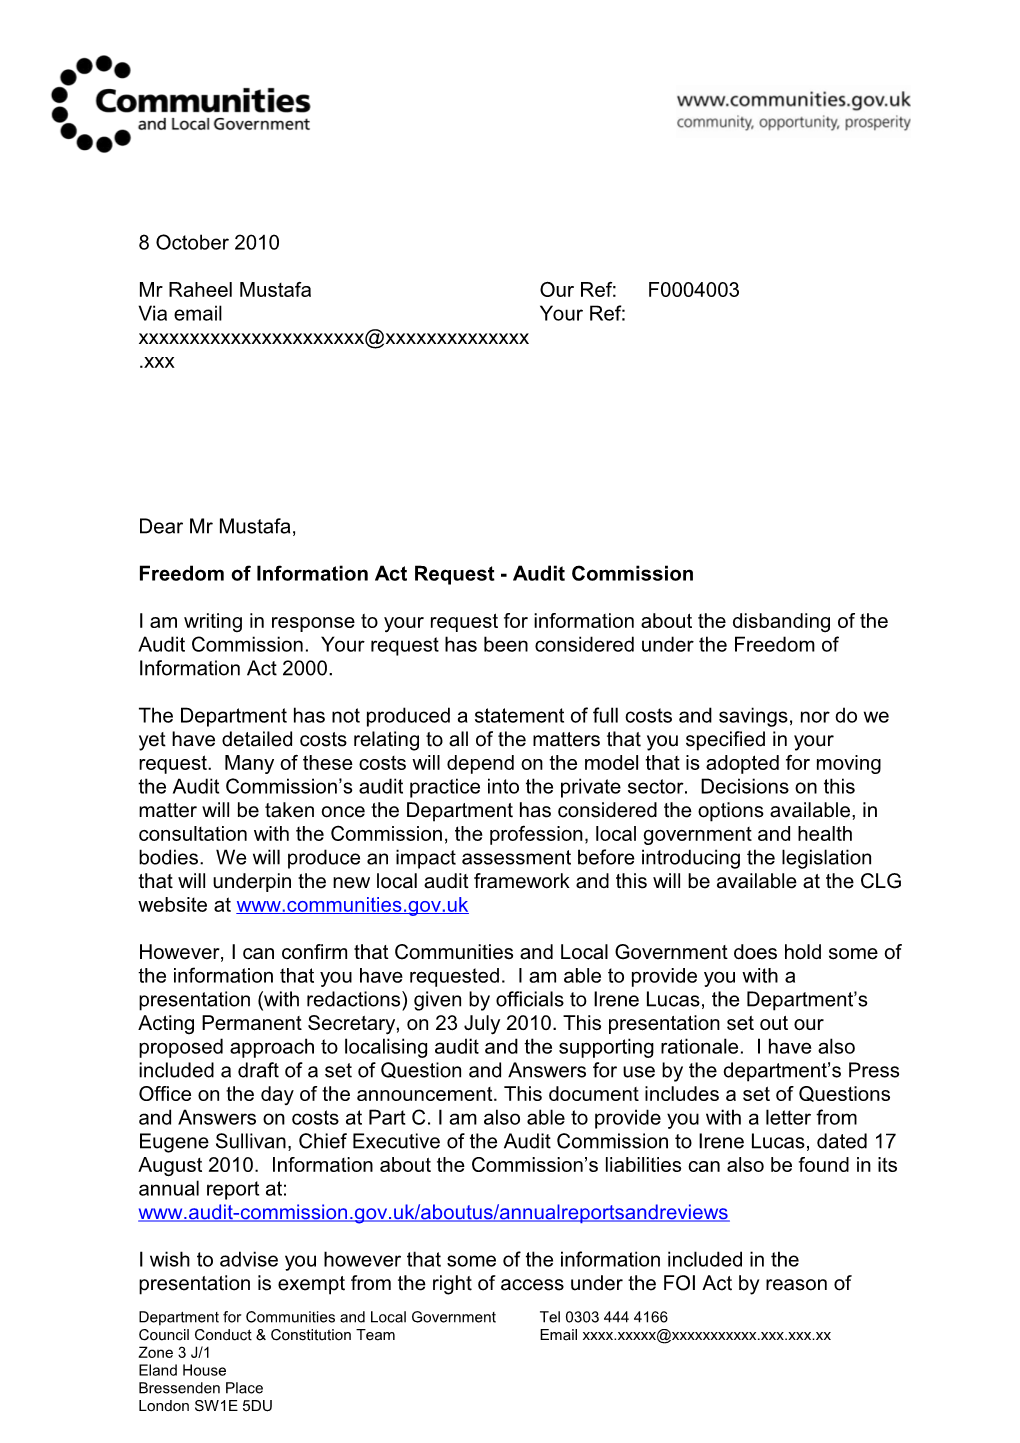 Freedom of Information Act Request - Audit Commission